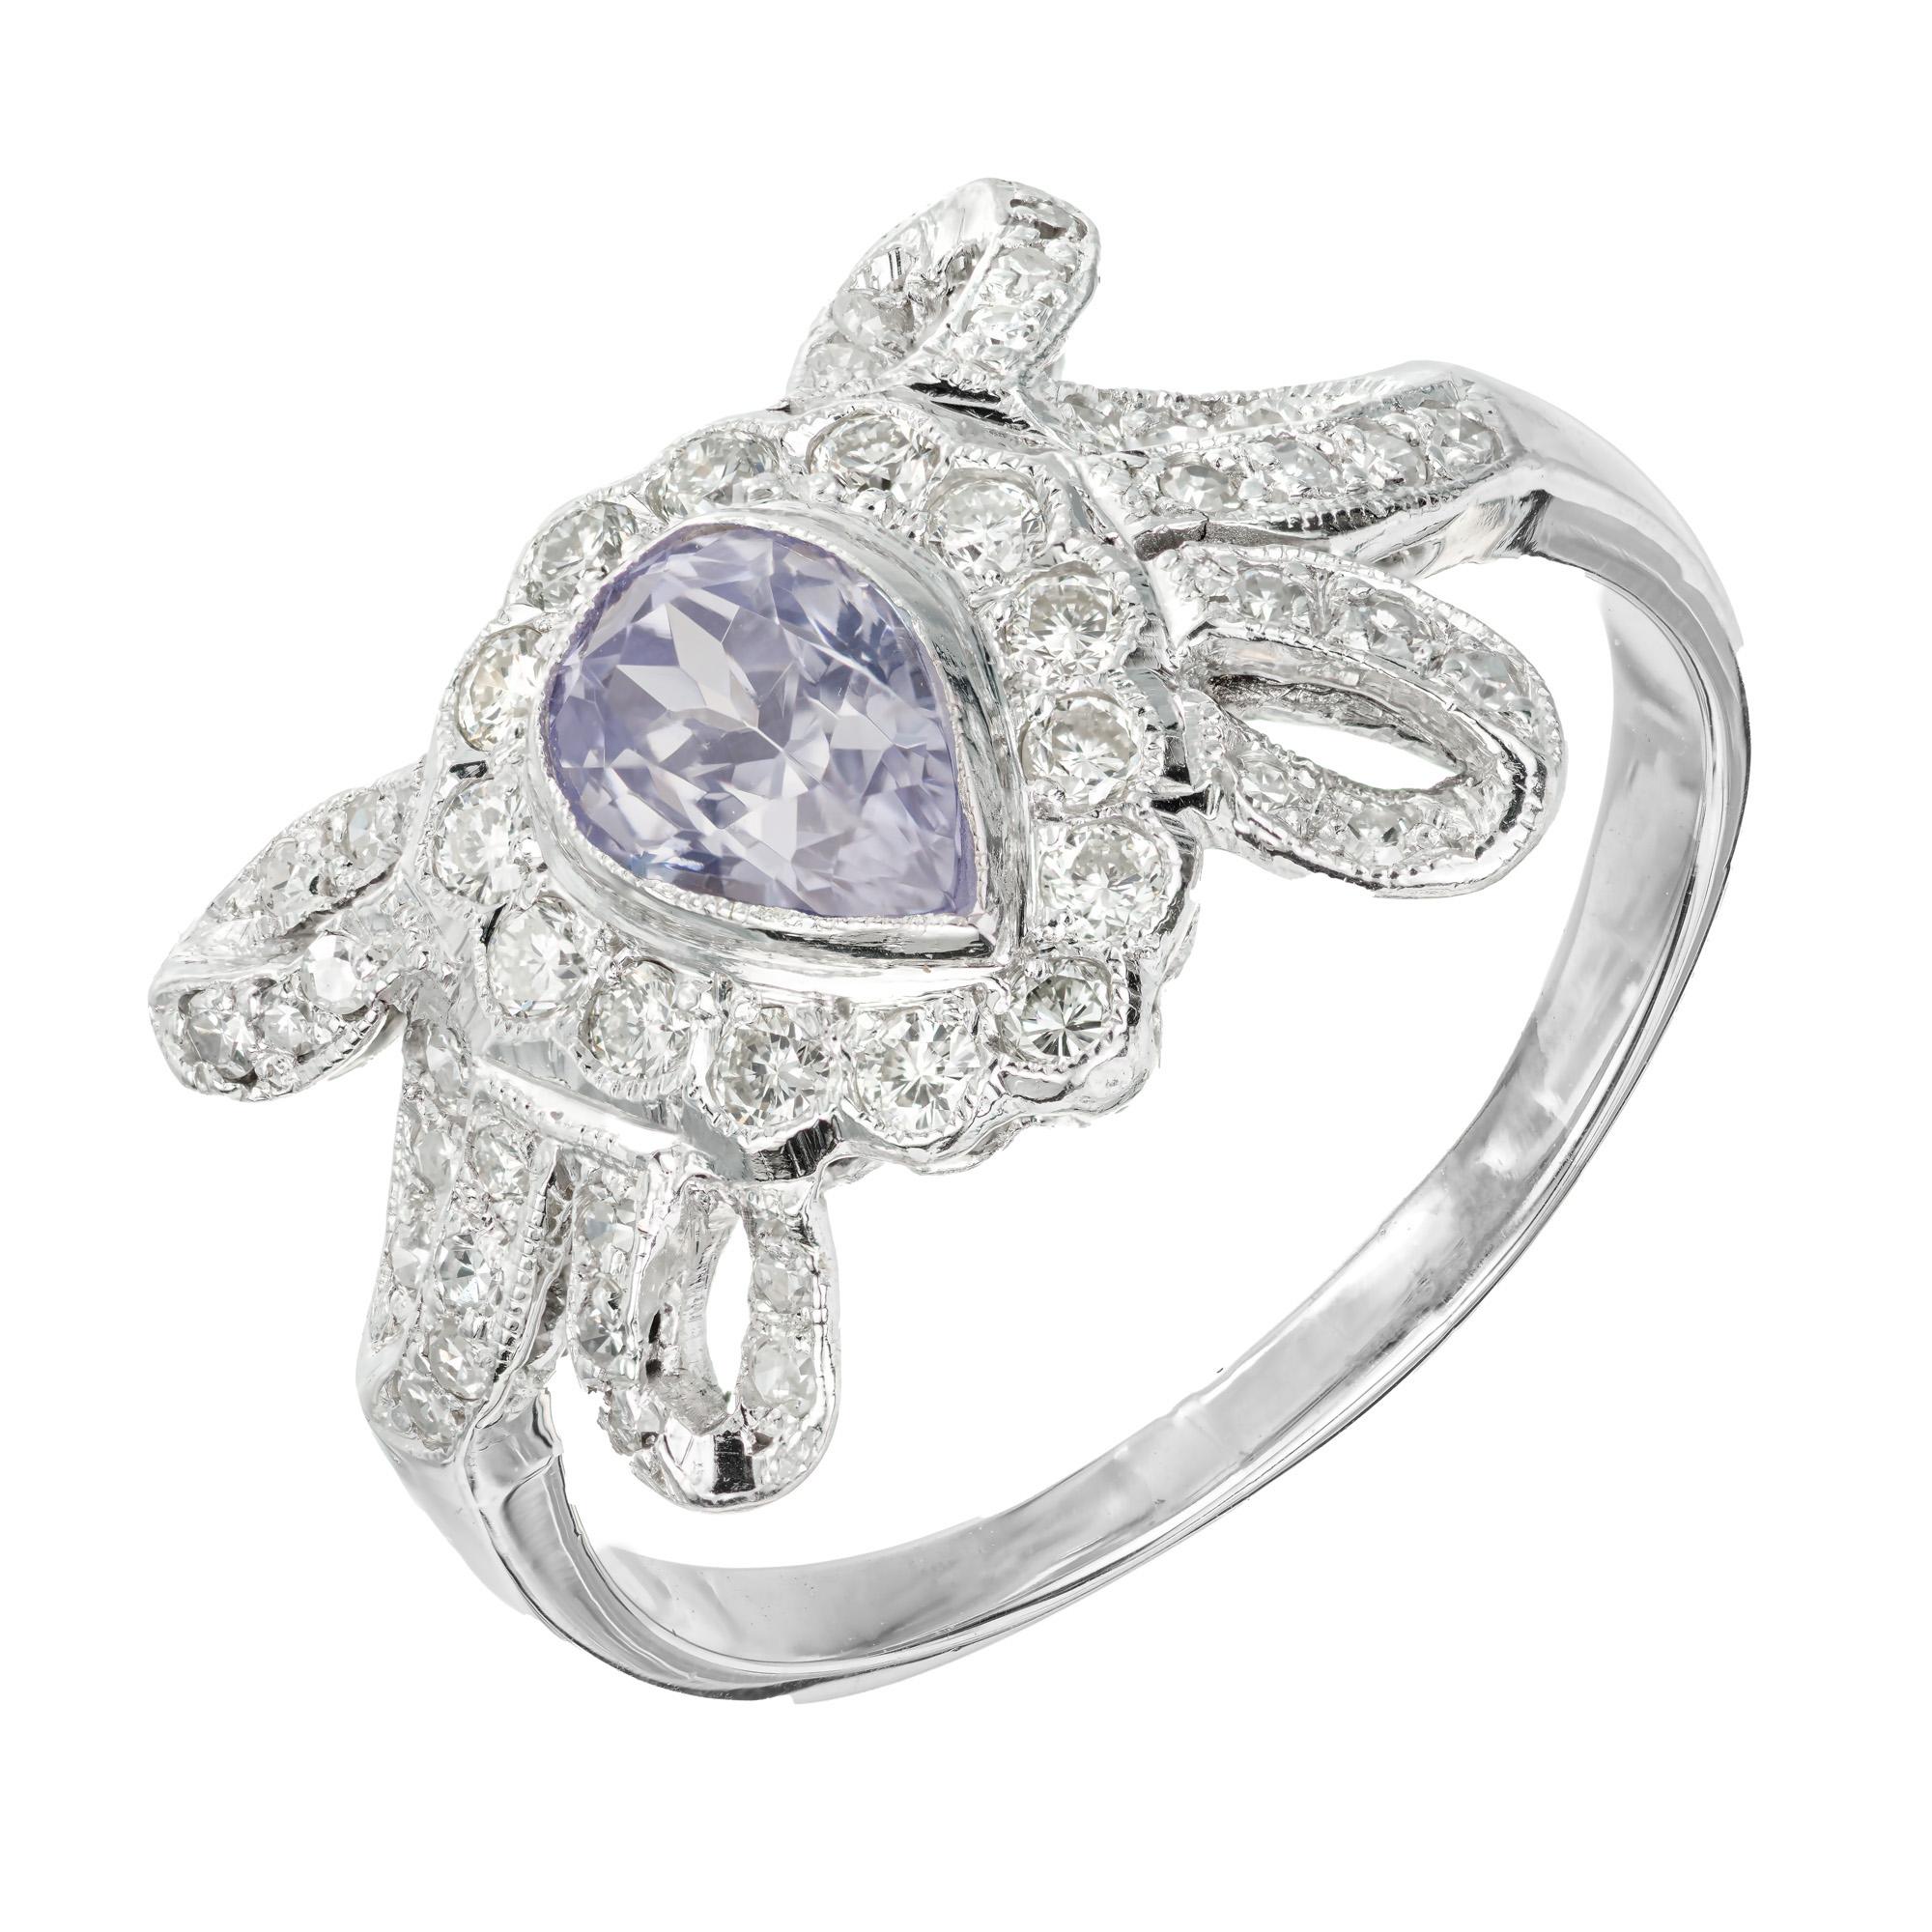 Original 1920's Art Deco Platinum swirl bow design ring with a AGL certified natural pear shaped, no heat light to medium periwinkle blue/purple .63ct center Sapphire, accented with 48 single cut diamonds approx. total weight .40cts

1 Natural no